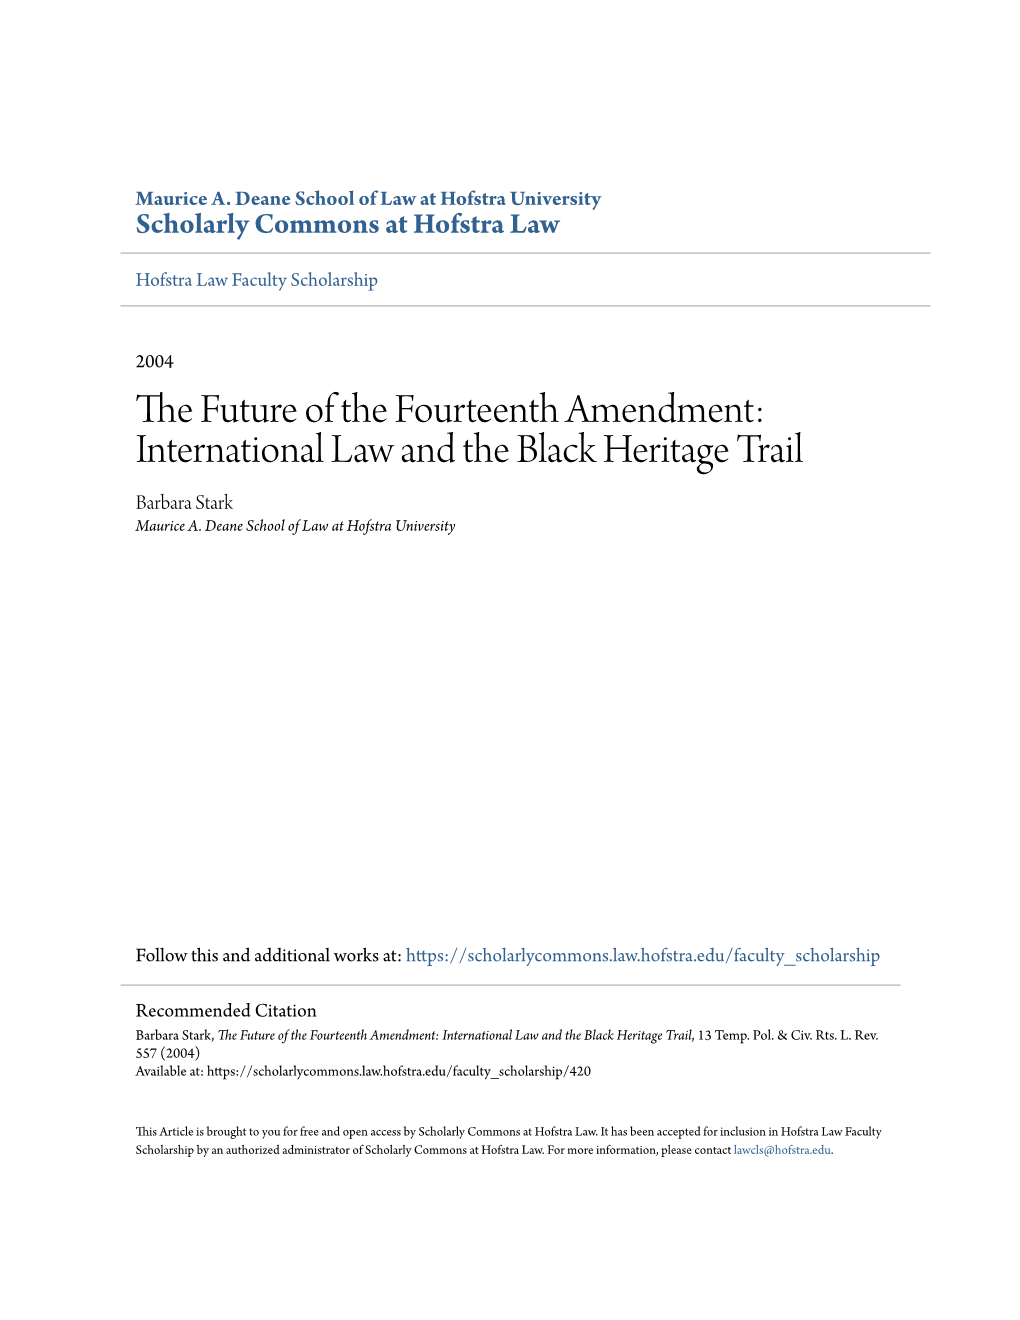 The Future of the Fourteenth Amendment: International Law and the Black Heritage Trail, 13 Temp